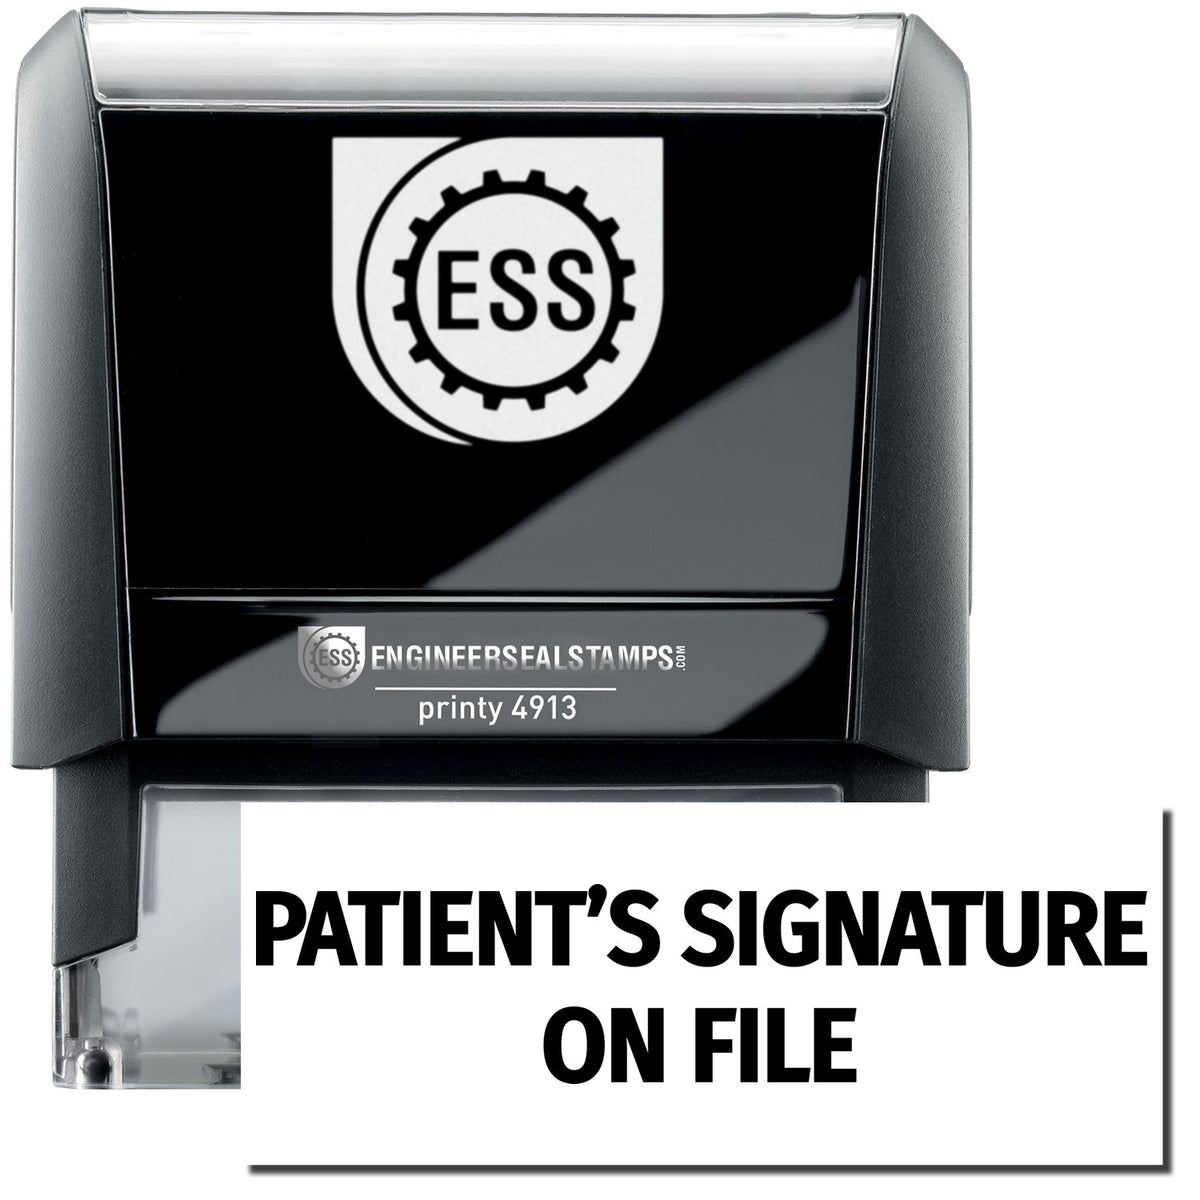 A self-inking stamp with a stamped image showing how the text &quot;PATIENT&#39;S SIGNATURE ON FILE&quot; in a large font is displayed by it after stamping.